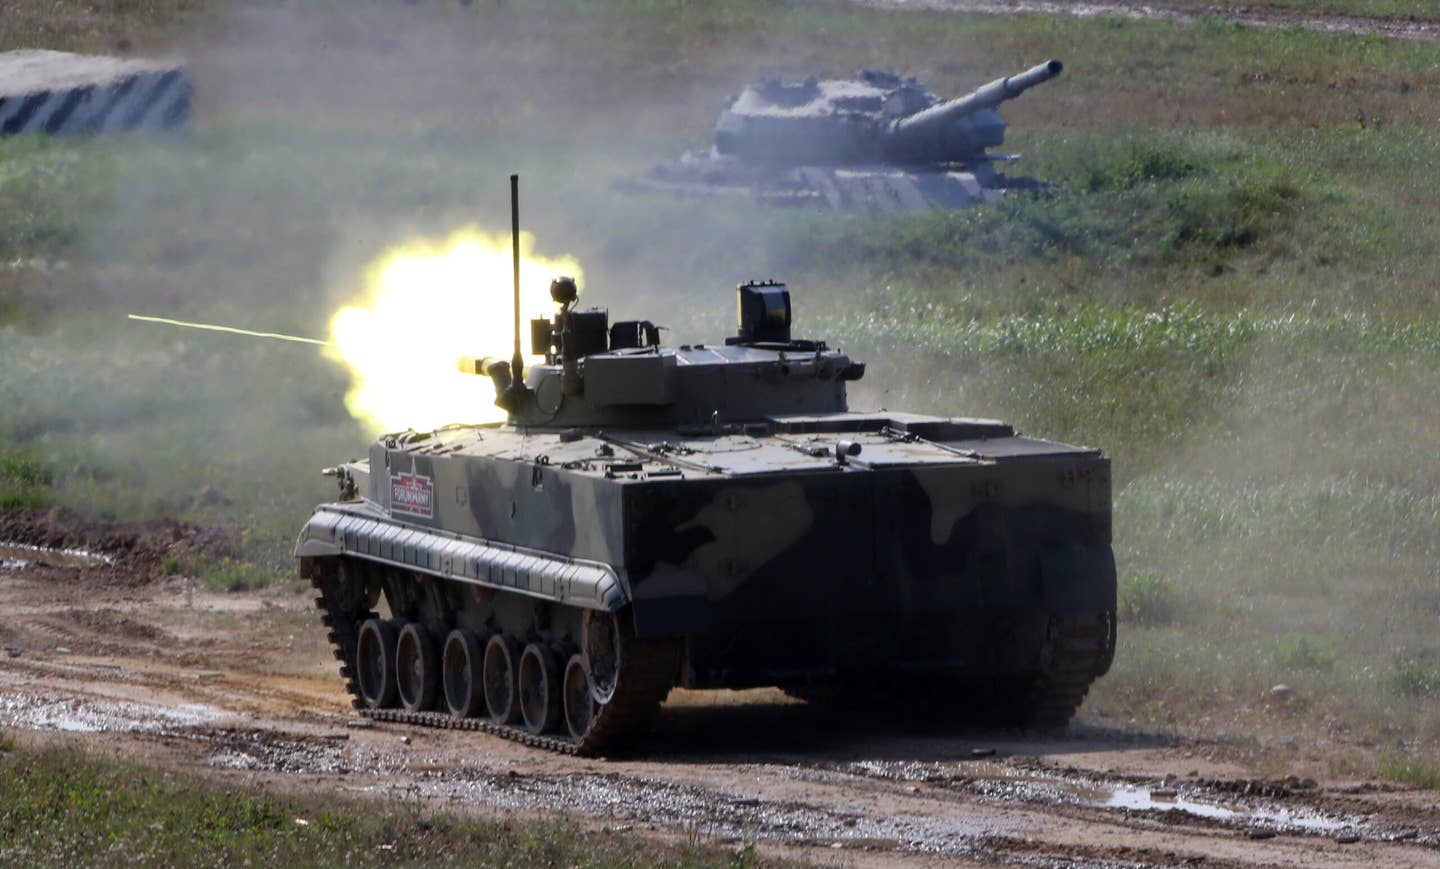 The Bradley Fighting Vehicle was purpose-designed to take on armor like this Russian BMP-3 infantry fighting. (Photo by Contributor/Getty Images)